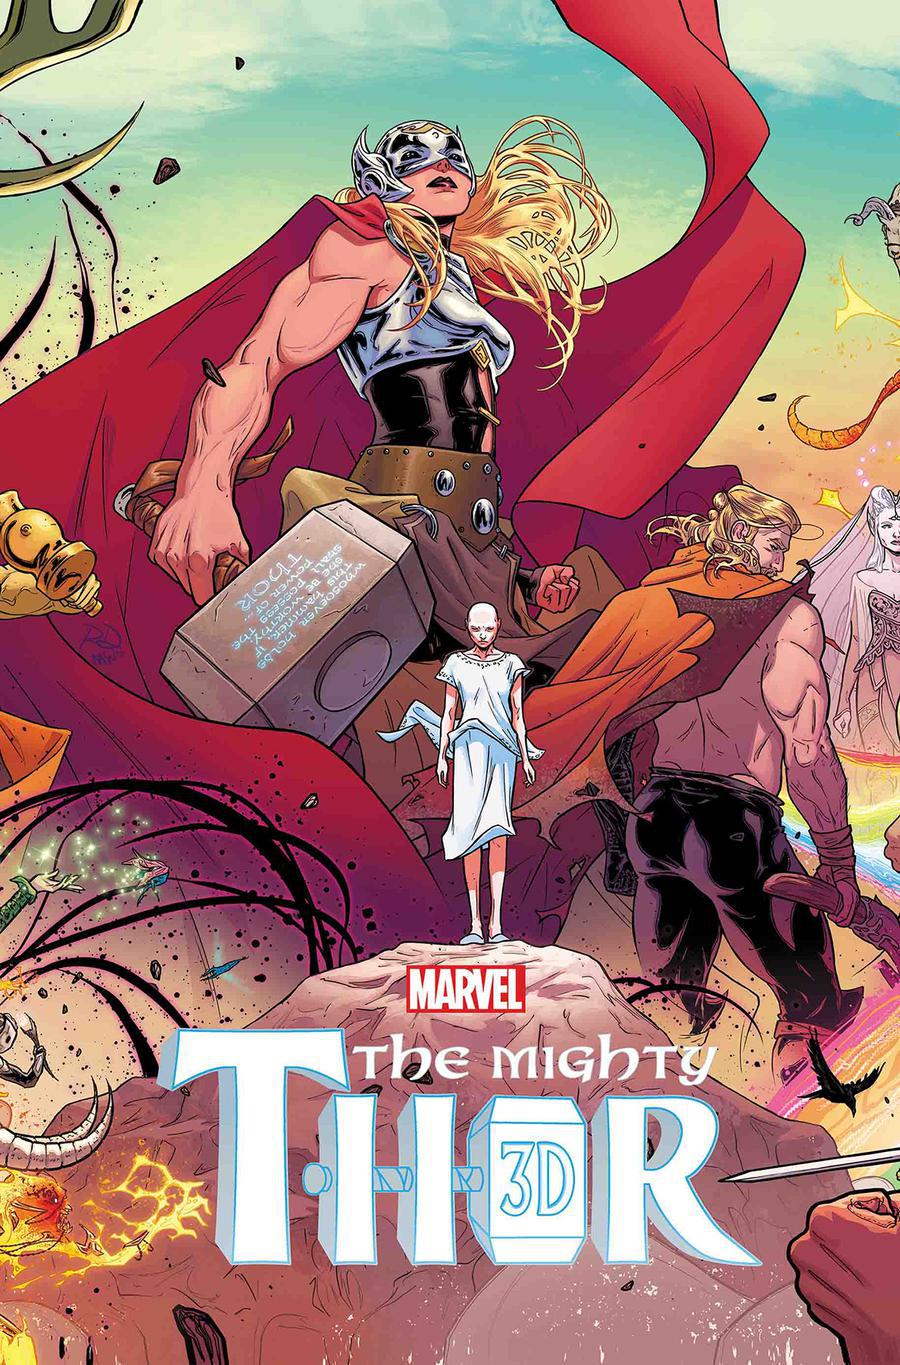 Mighty Thor 3D #1 Cover B Without Polybag (War Of The Realms Tie-In)